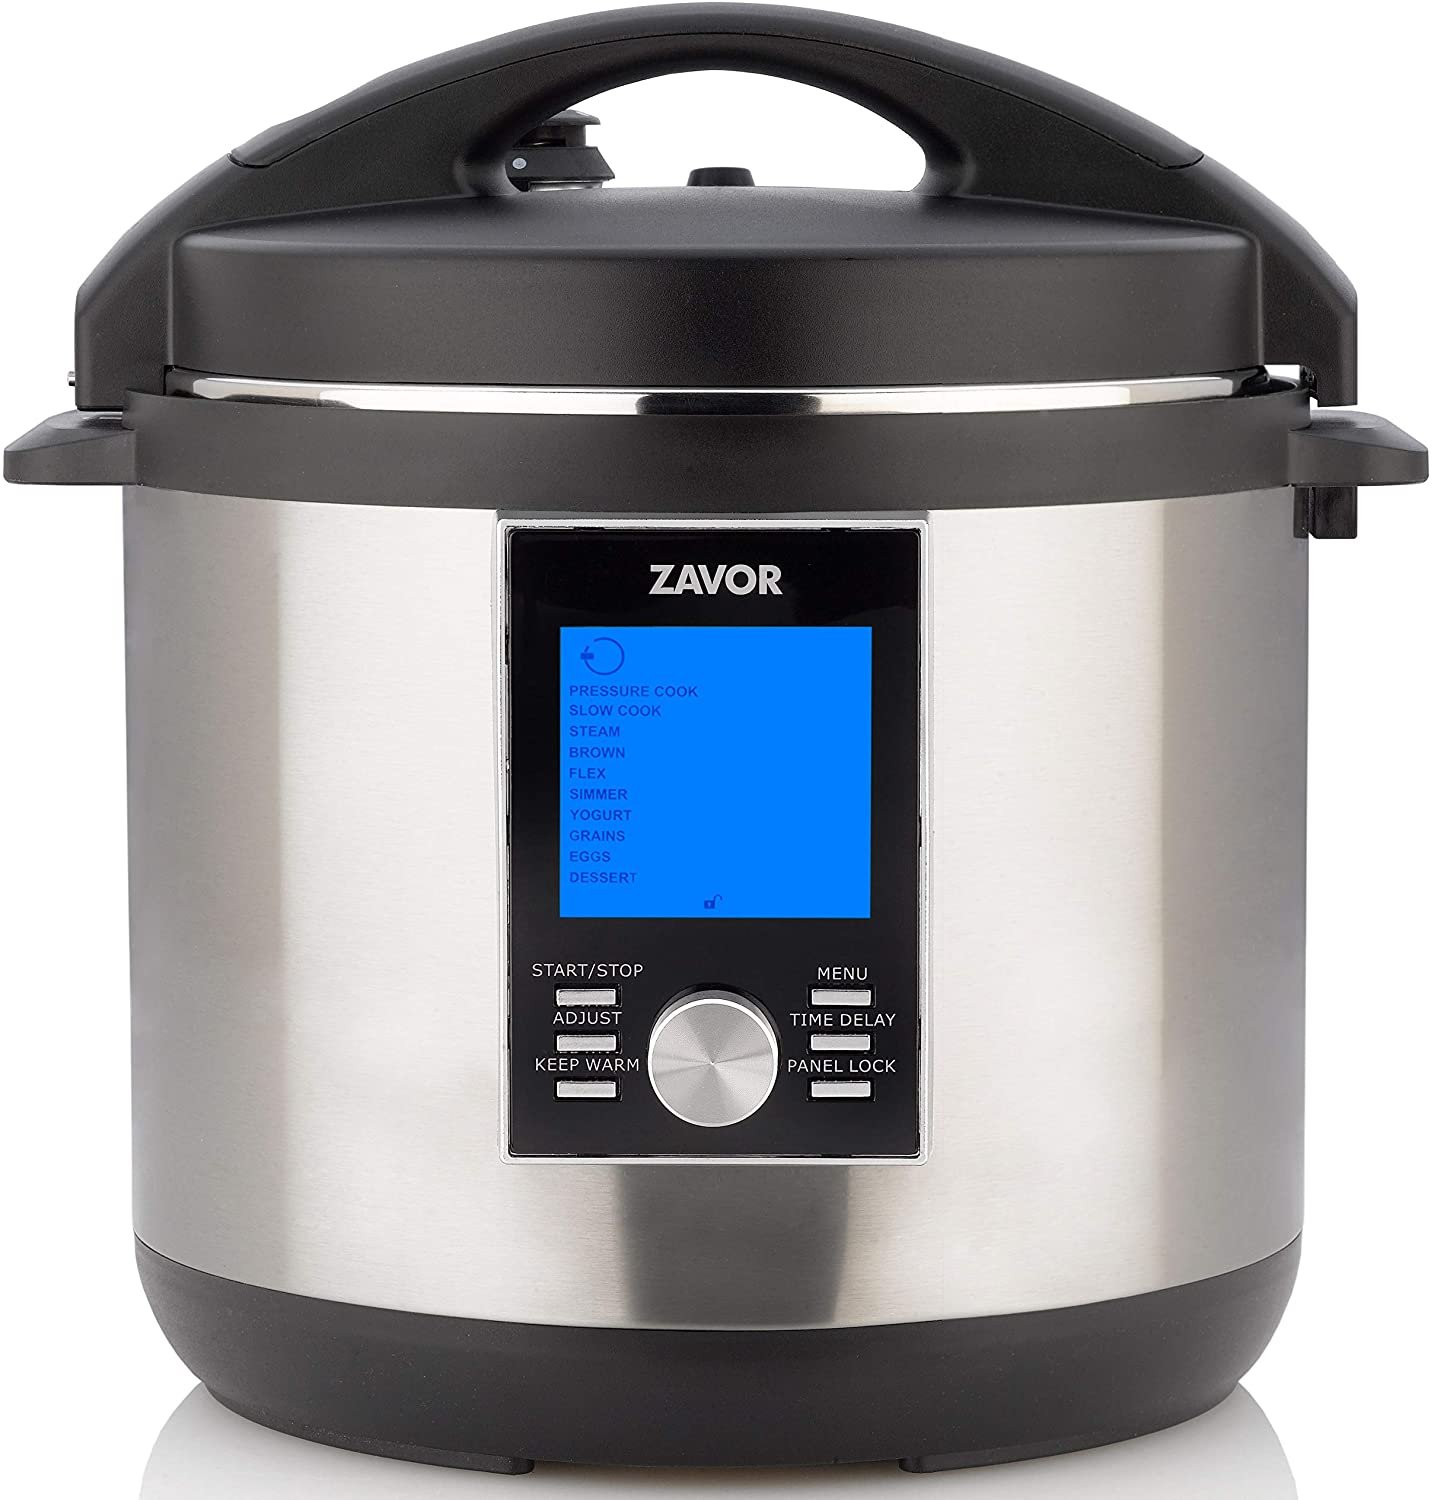 What Size Crockpot Should You Buy? (Quick Guide) - Prudent Reviews